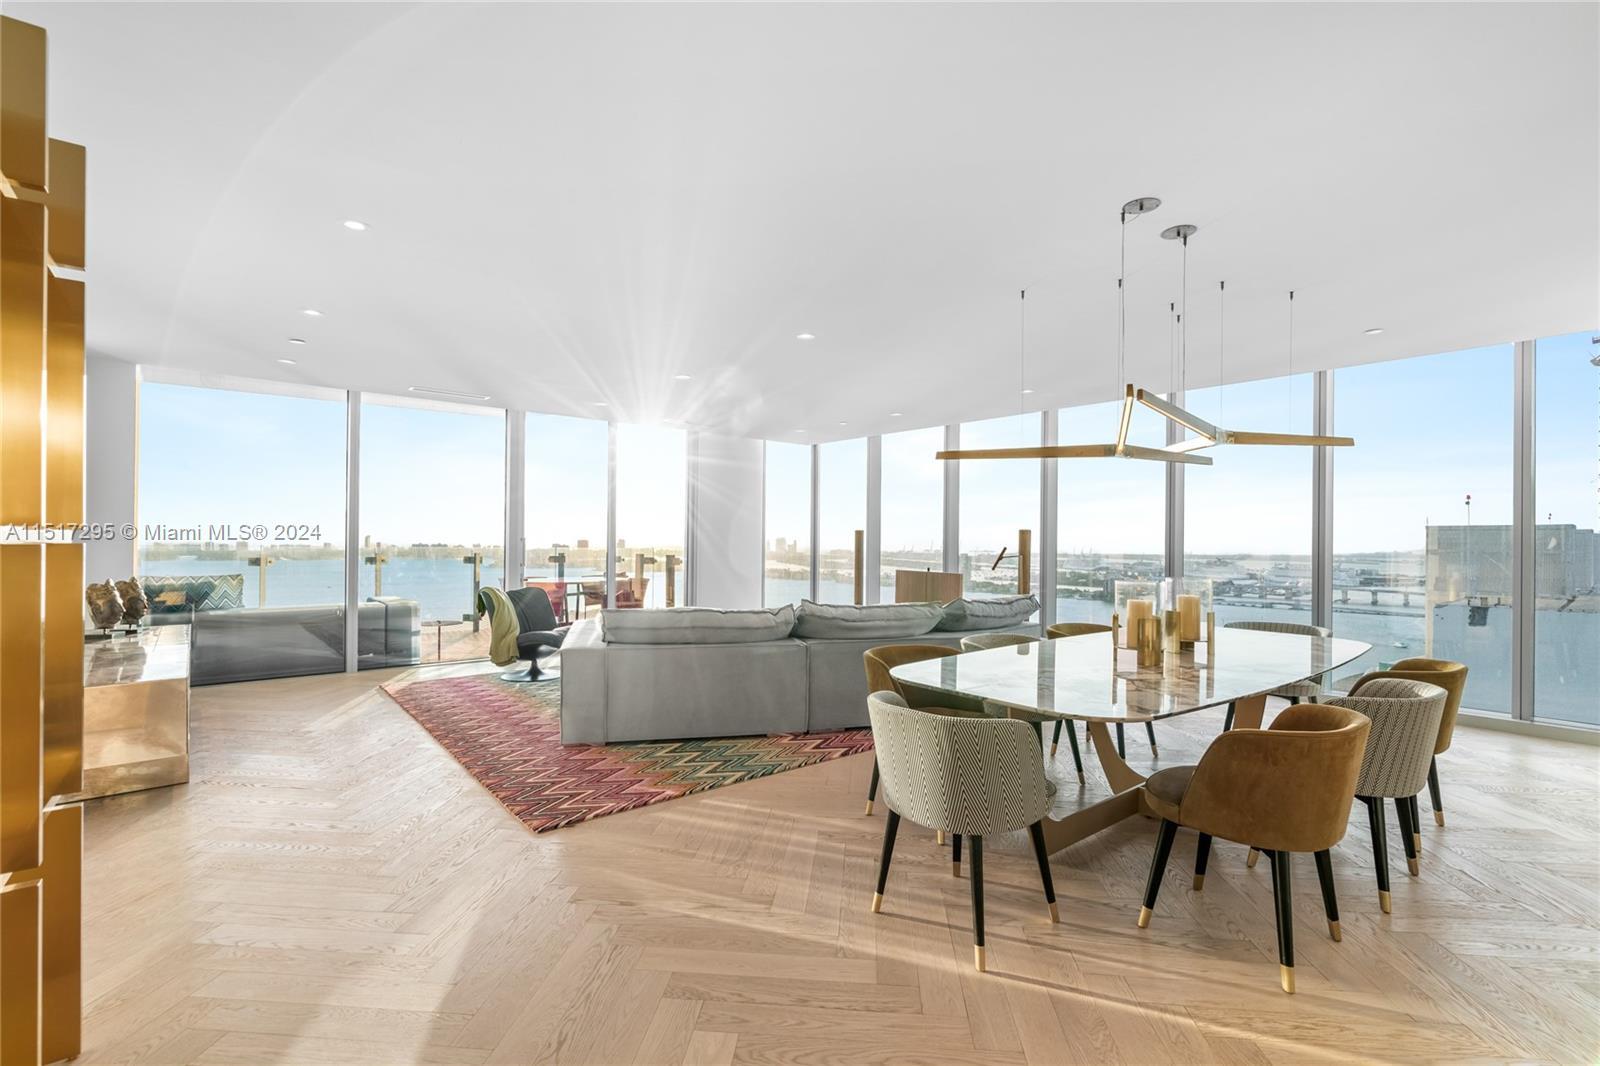 Welcome to this stunning, custom-made corner-unit waterfront residence. Located on the 30th floor an